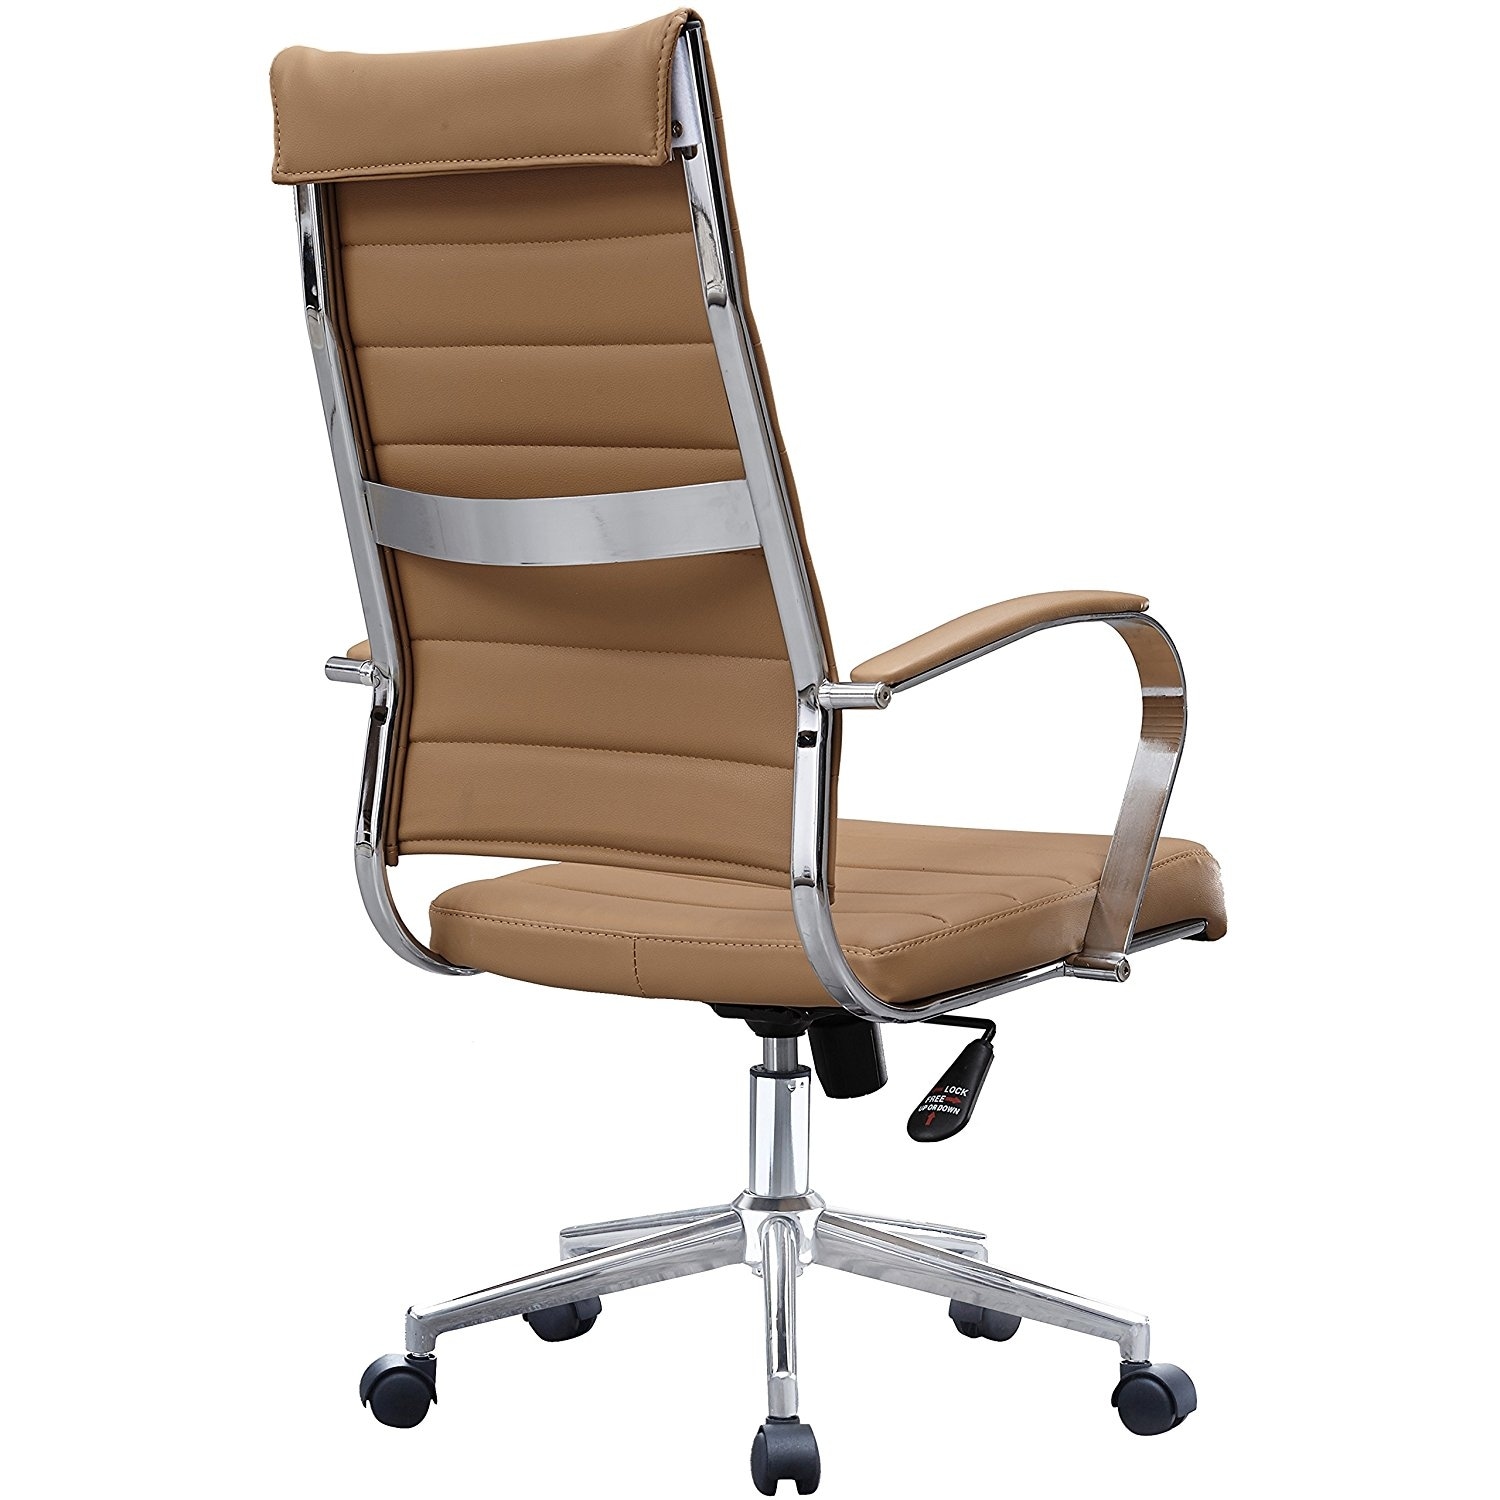 https://ak1.ostkcdn.com/images/products/is/images/direct/a63b1986fd7efdb7458763399c9f6f8d483460d8/2xhome---Tan---Modern-High-Back-Ribbed-Office-Chair-PU-Leather-Swivel-Tilt-Adjustable-Cushion-Chair-Designer-Boss-Executive.jpg